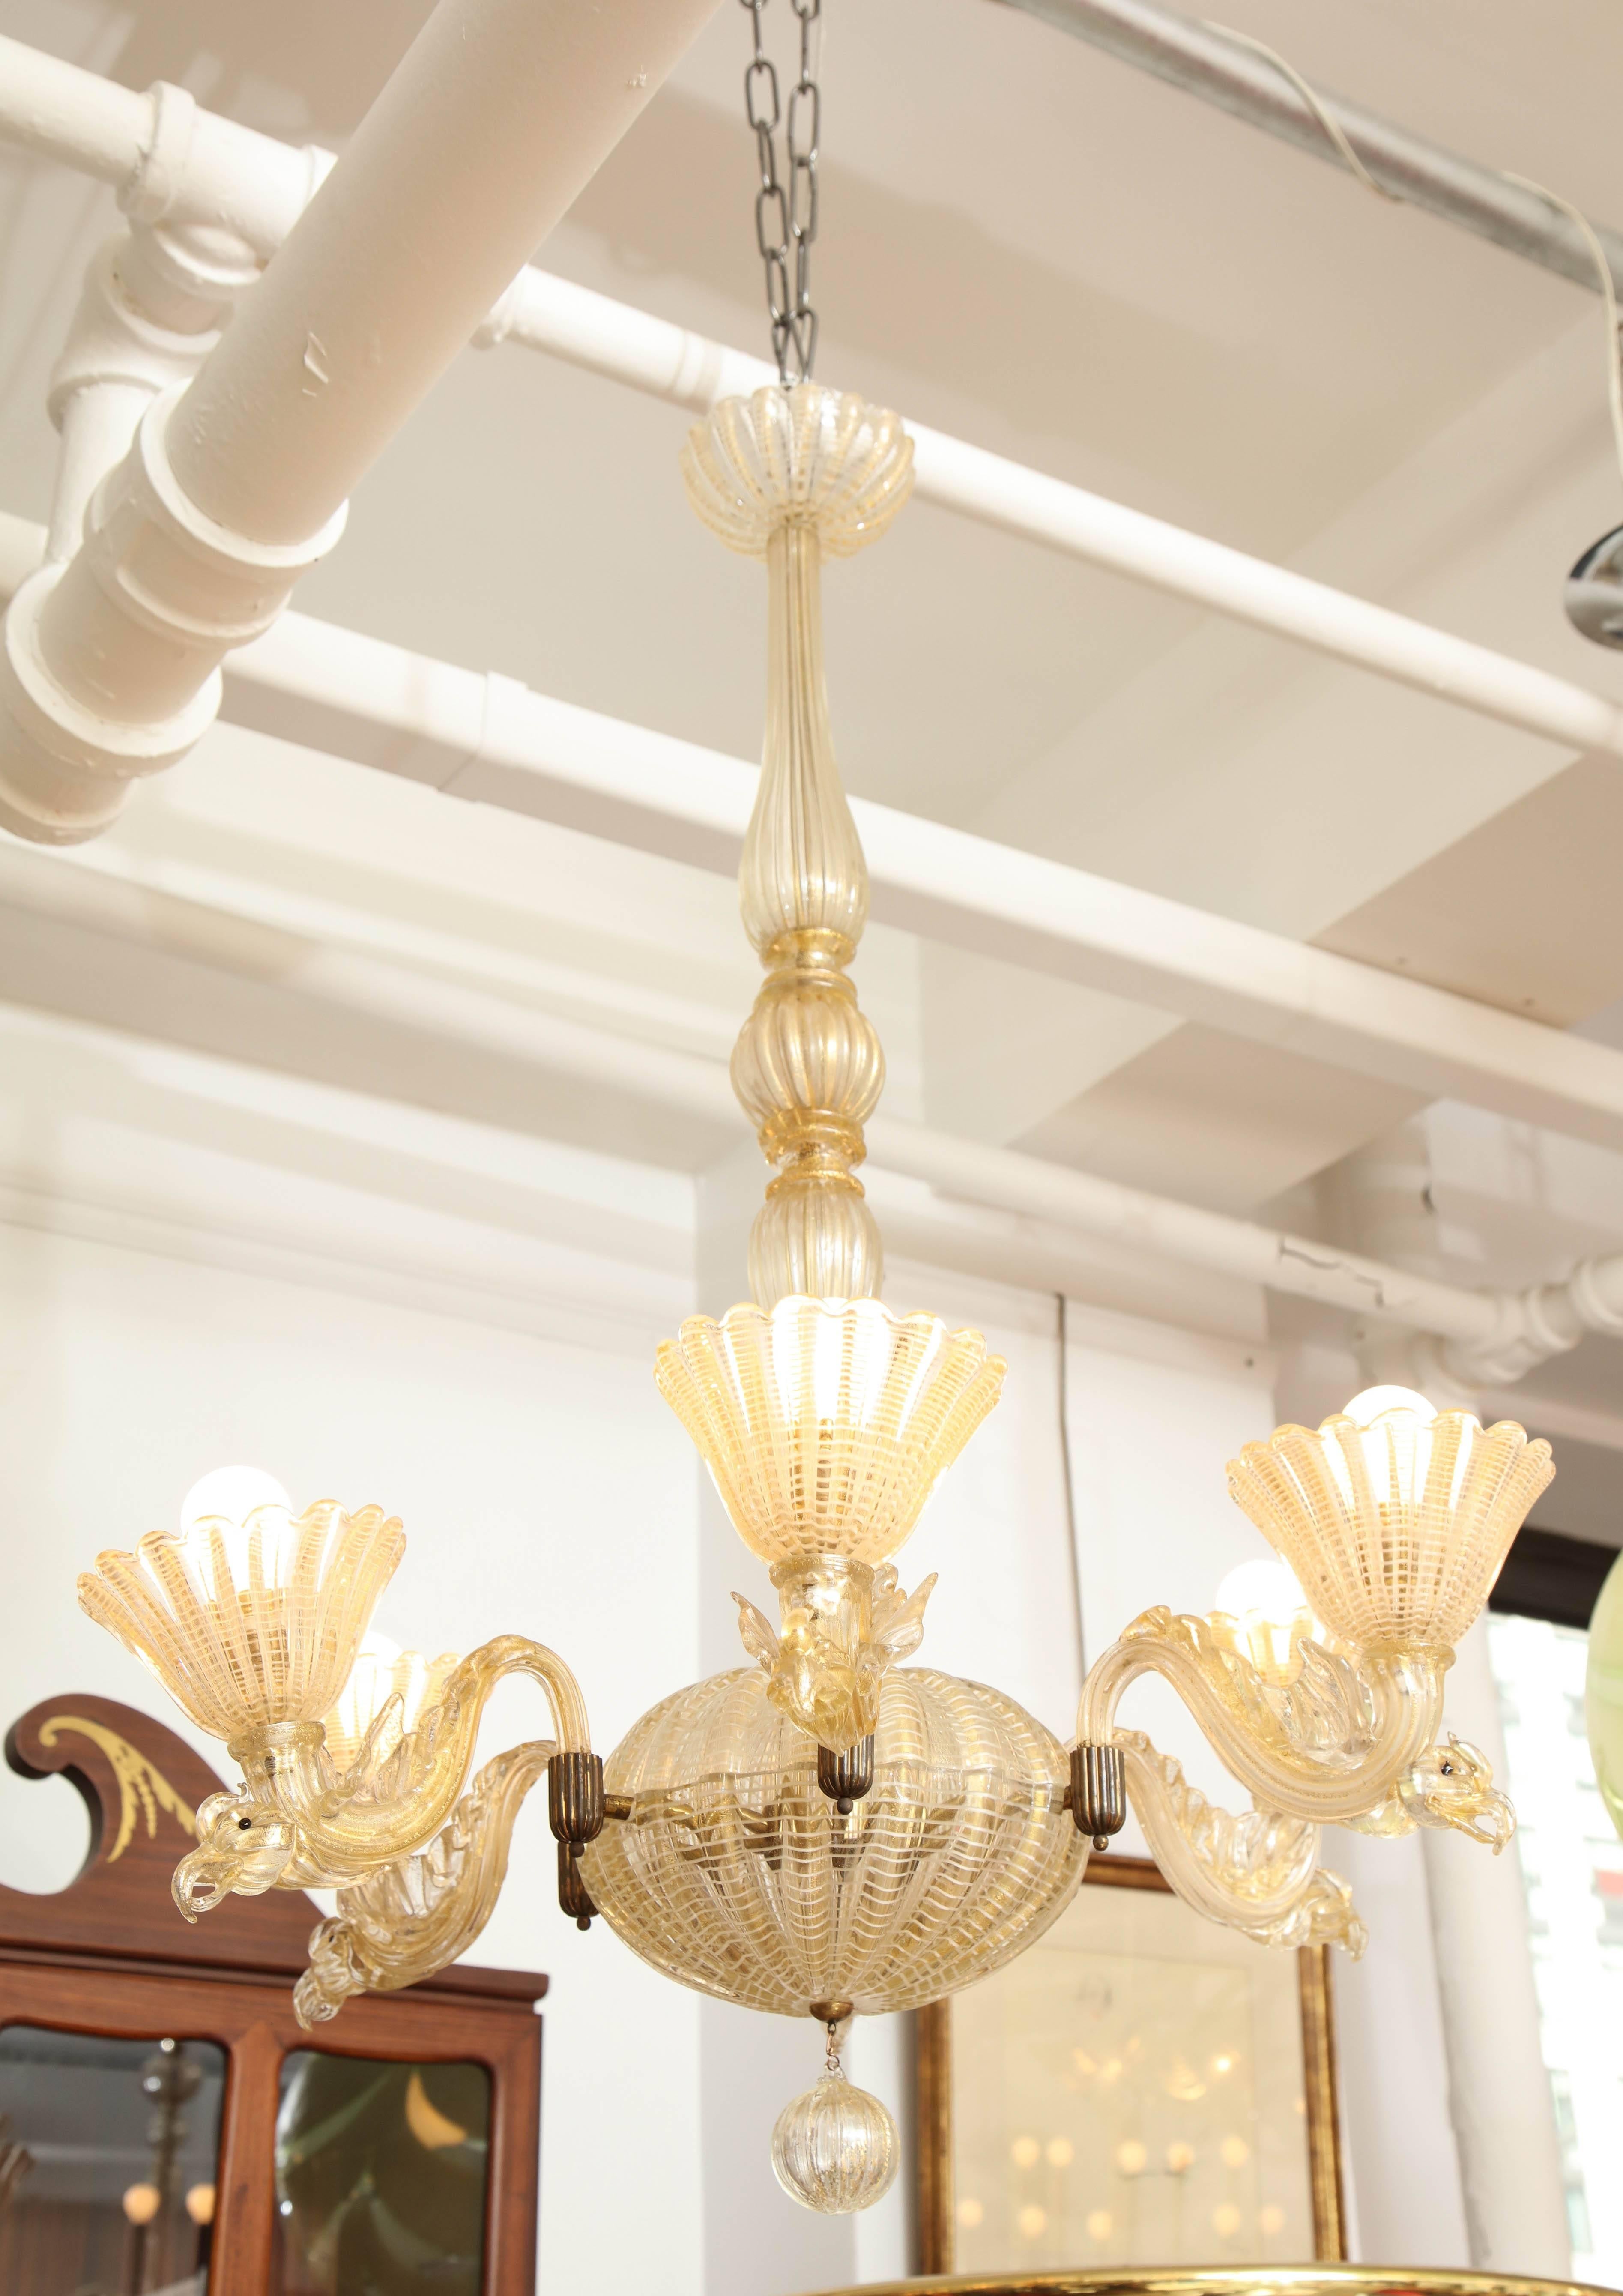 Barovier & Toso Chandelier Made in Venice, 1935 For Sale 1